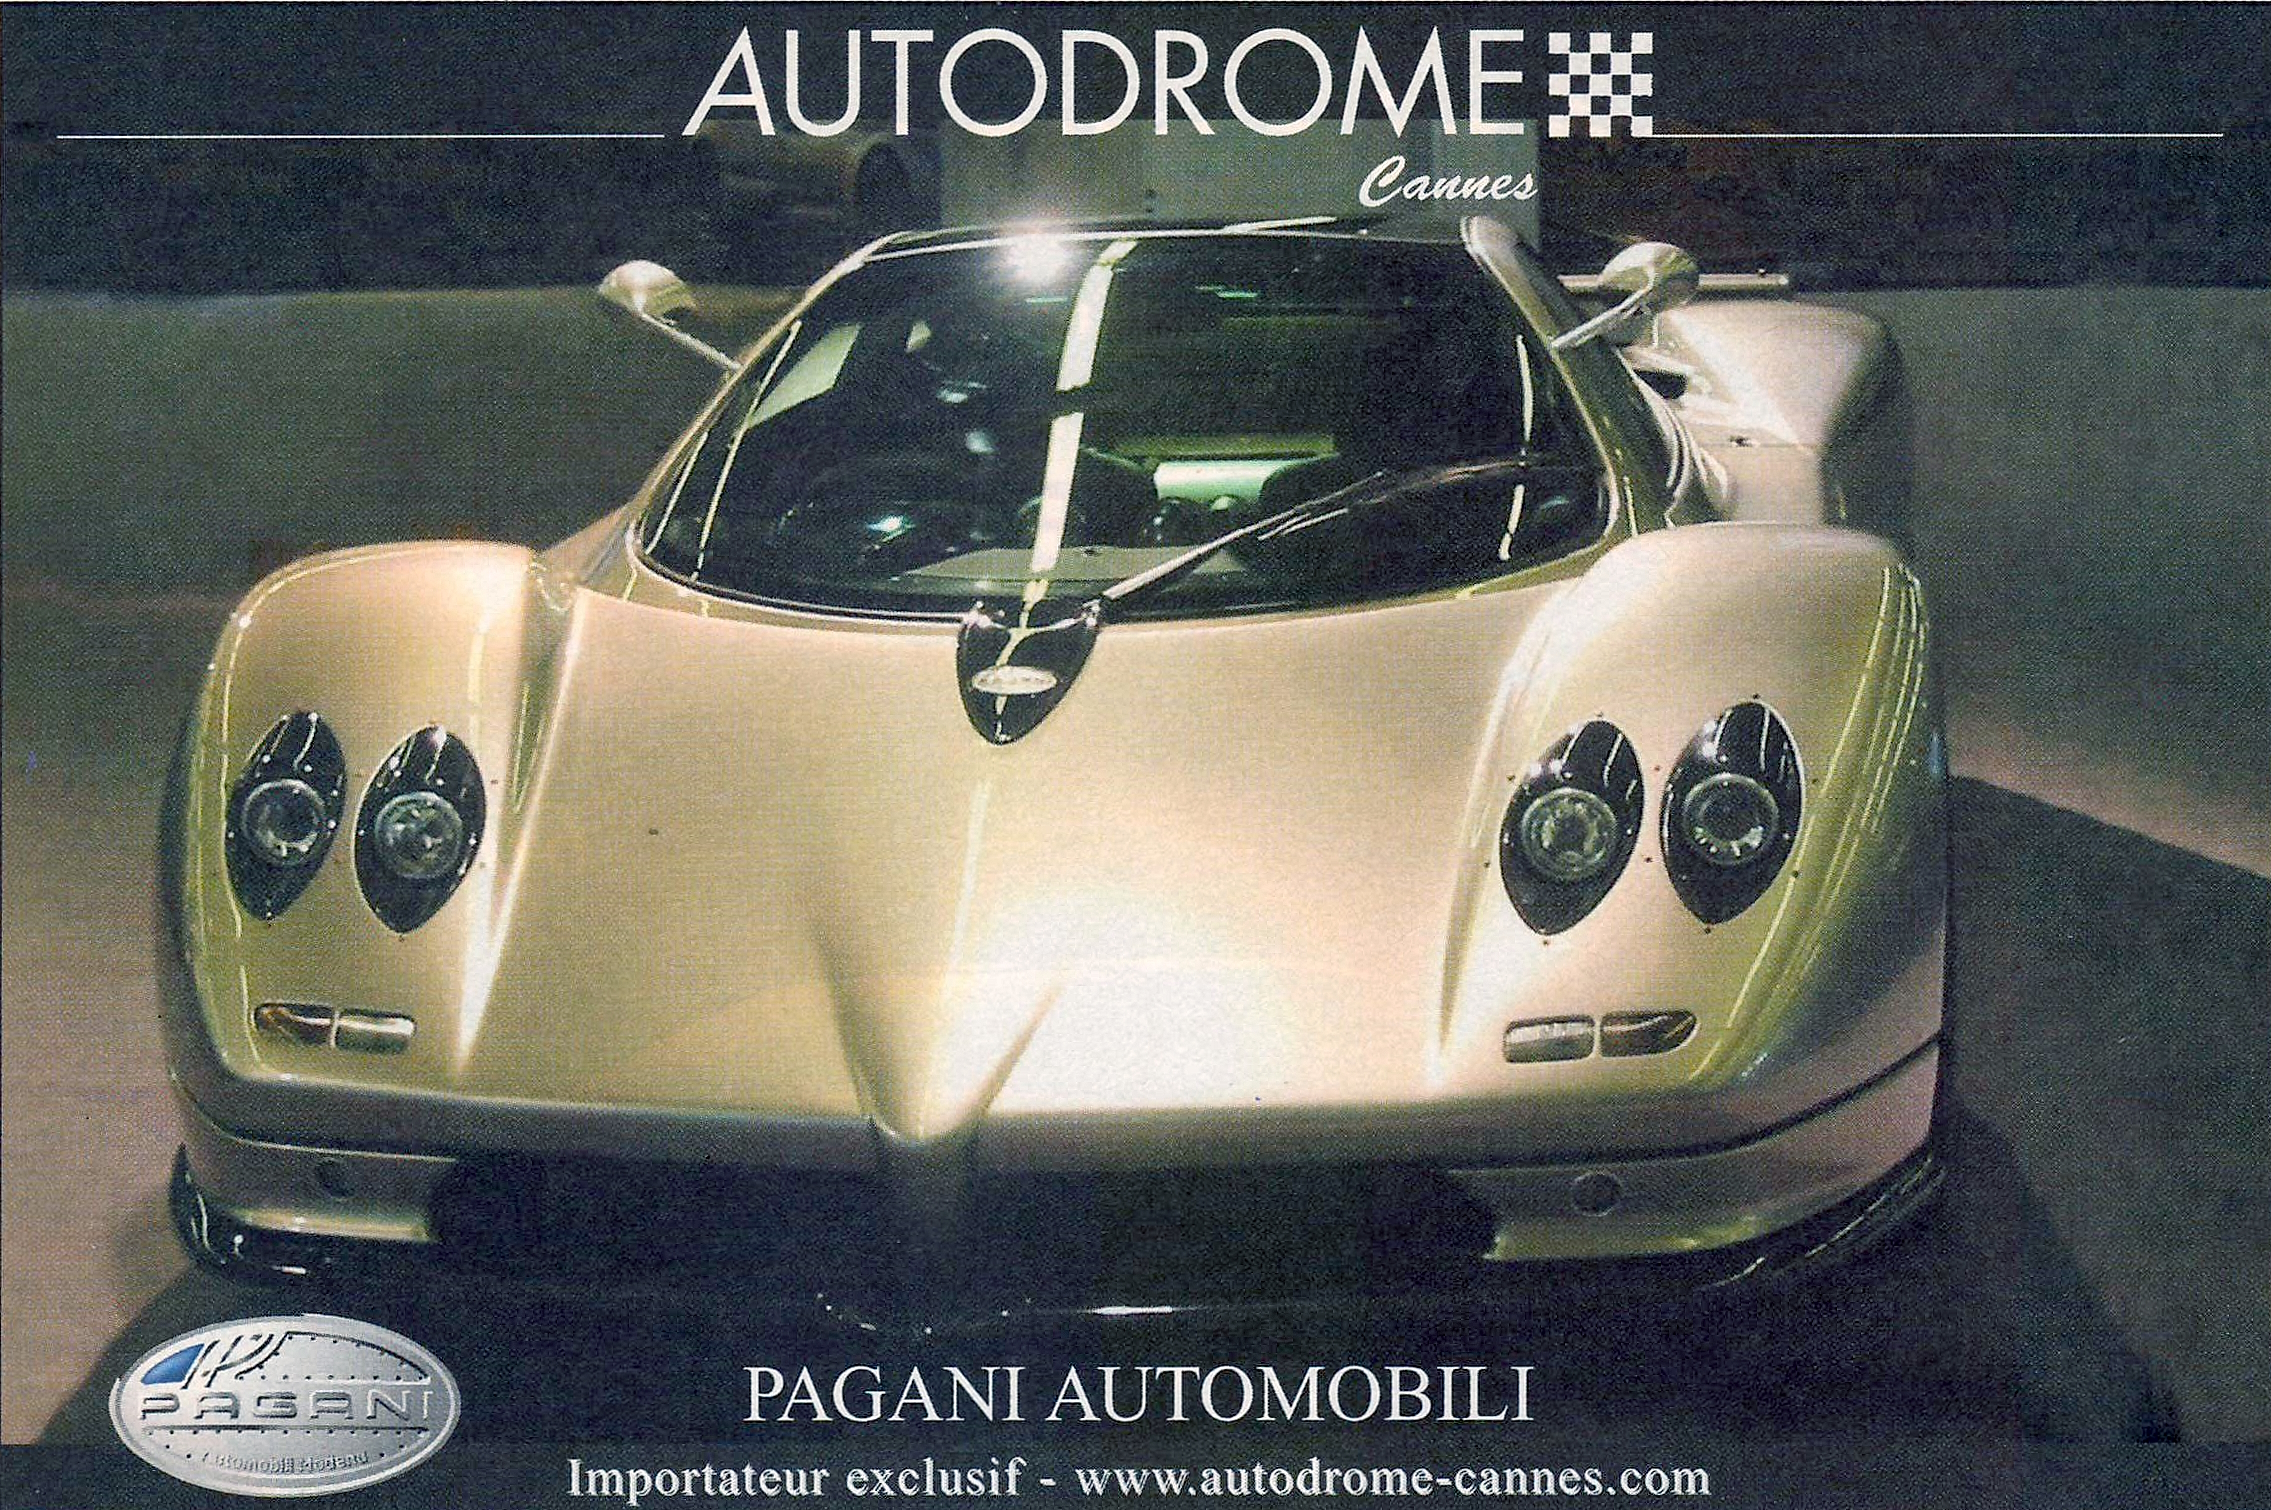 Autodrome-Cannes-first Pagani-Importer